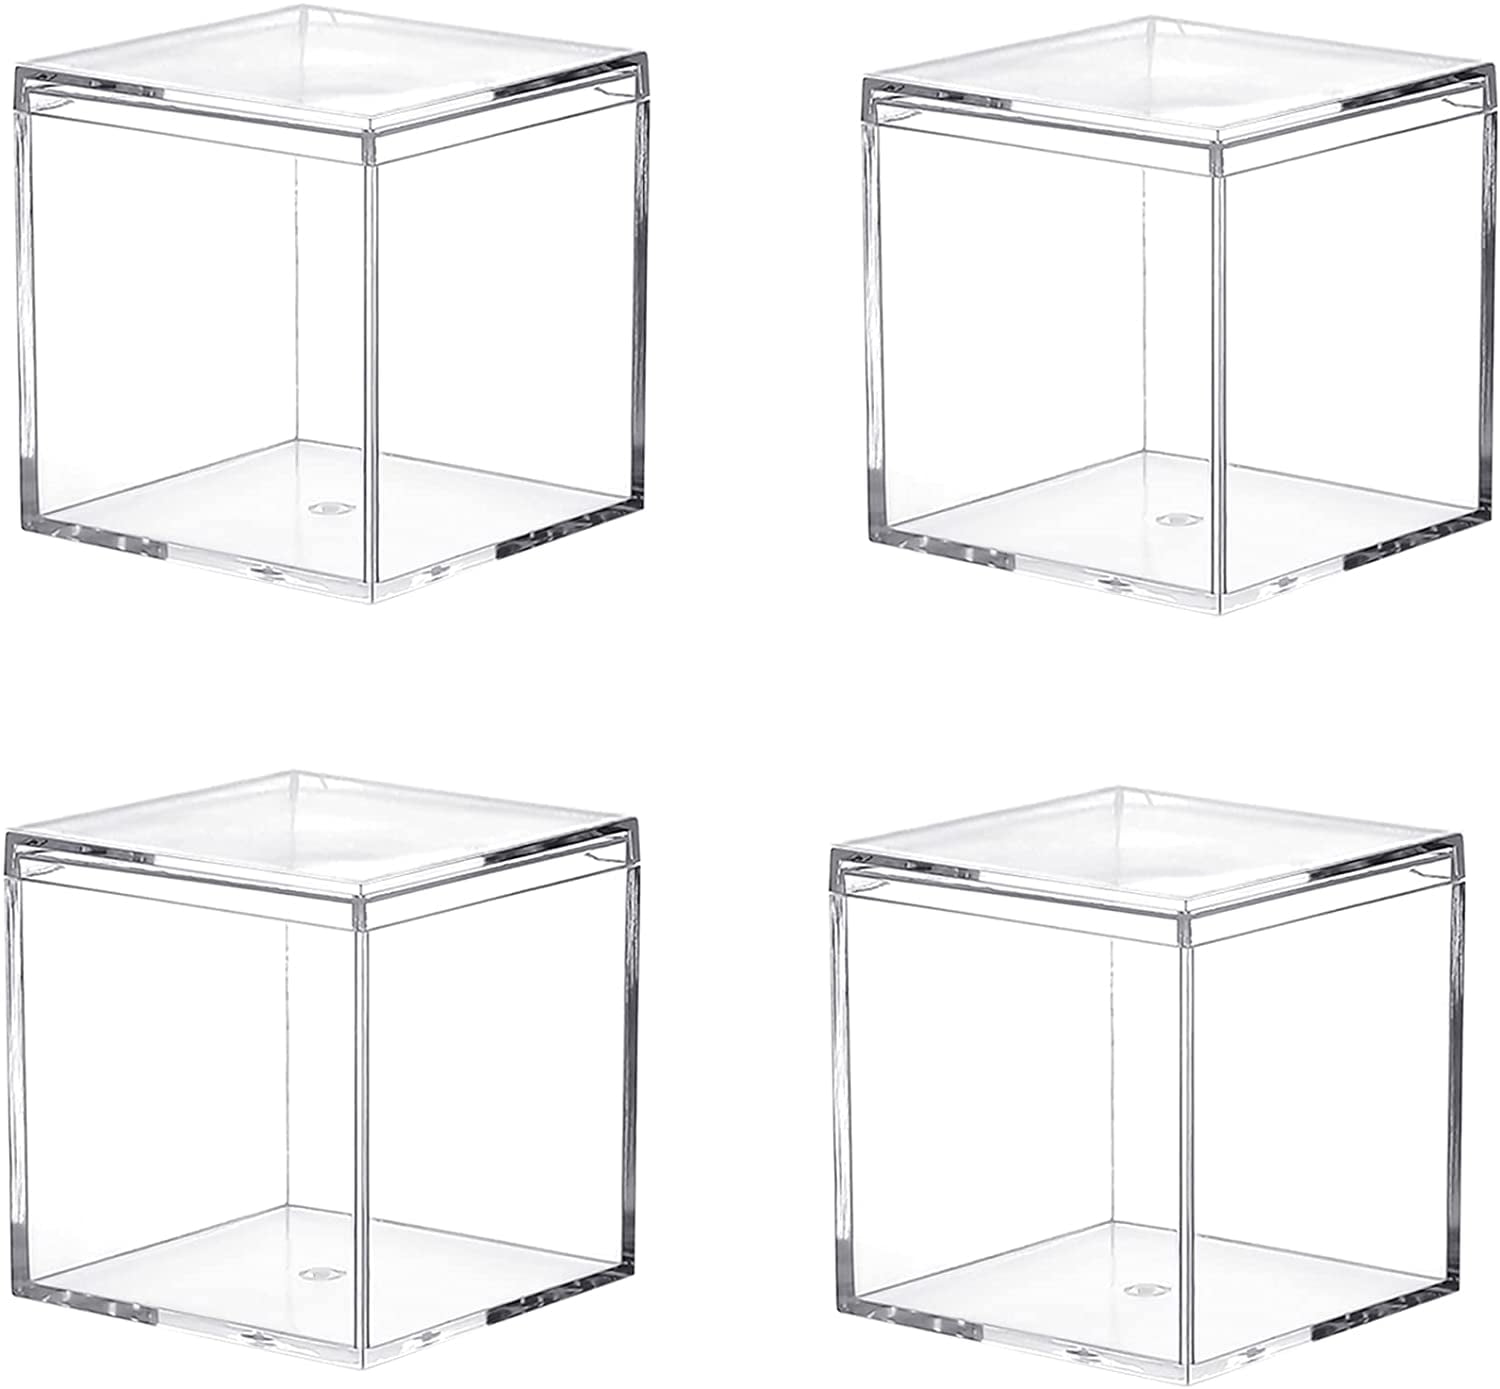 Lomgwumy Clear Acrylic Plastic Square Cube, 4-piece Acrylic Clear Box,  Durable, with Lid, Acrylic Square Container is Suitable for Storing Candy